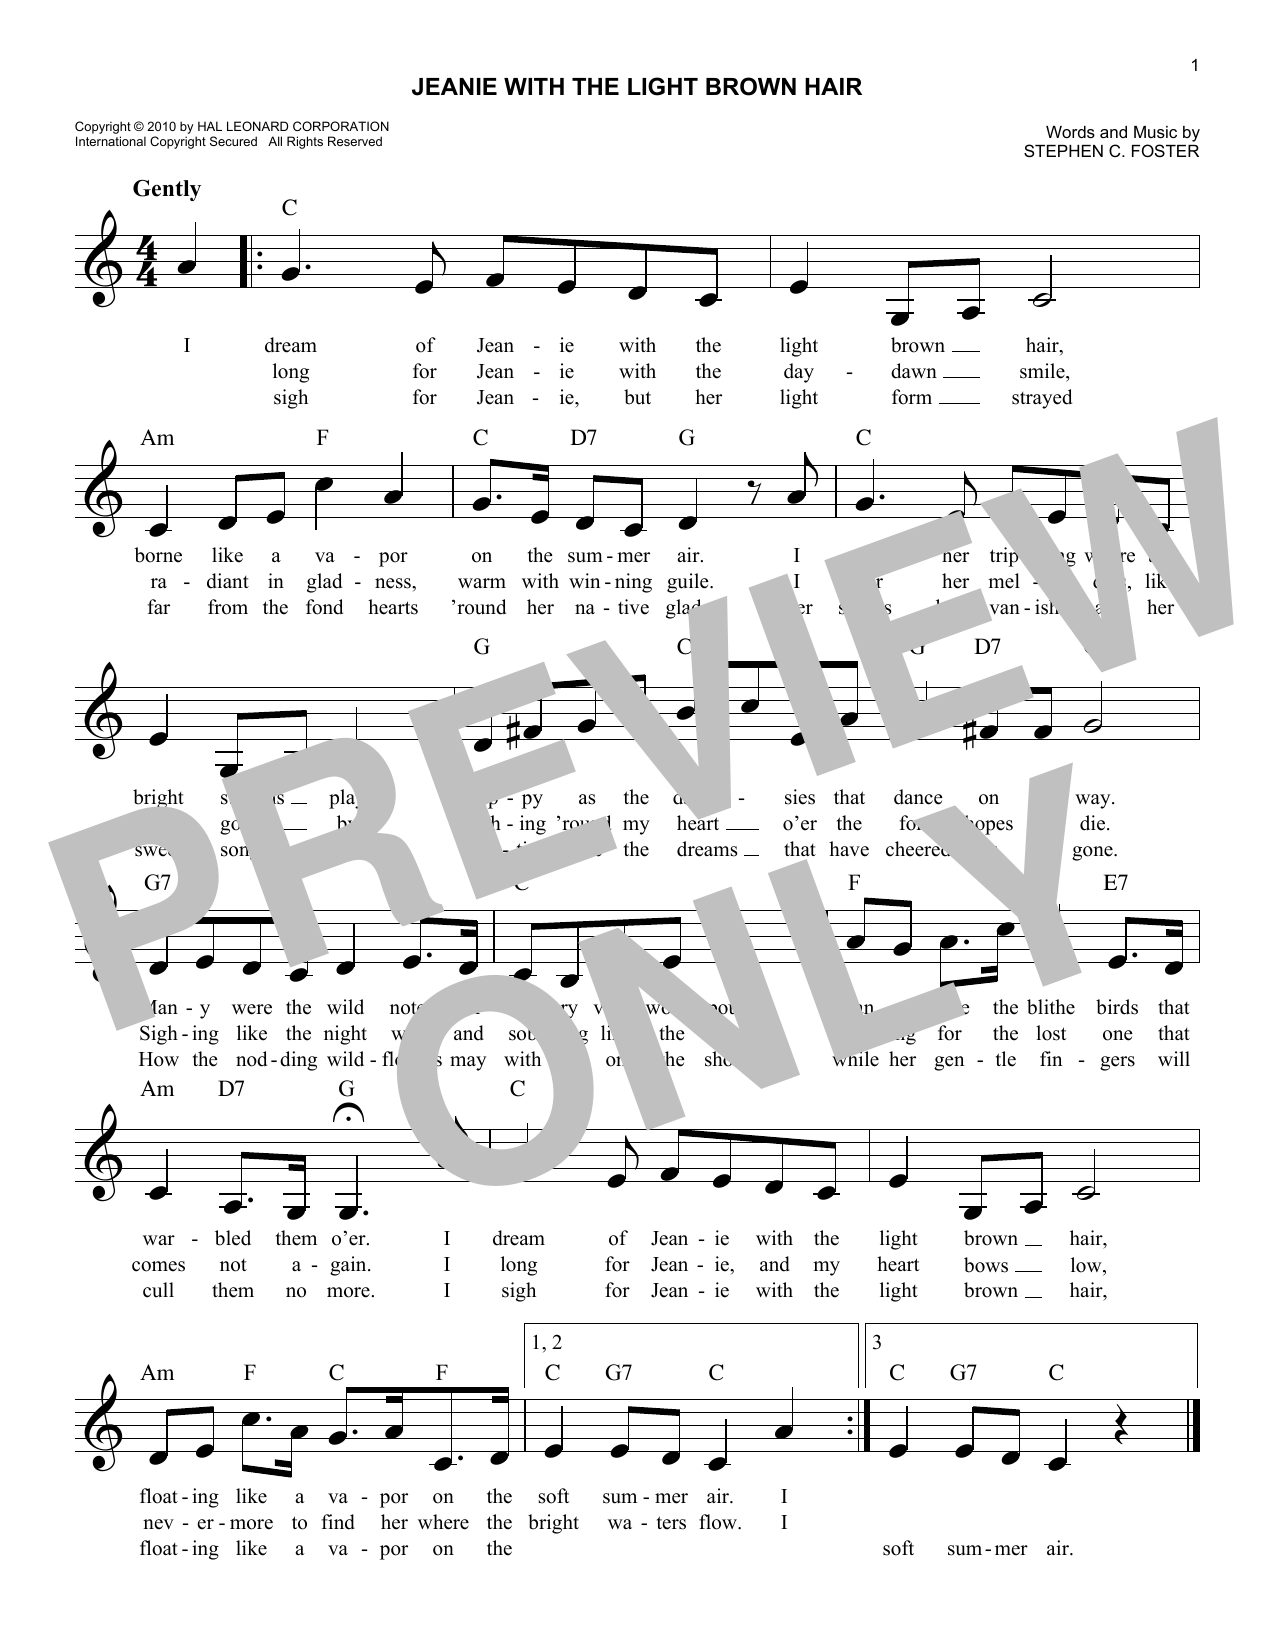 Stephen C. Foster Jeanie With The Light Brown Hair sheet music notes and chords. Download Printable PDF.